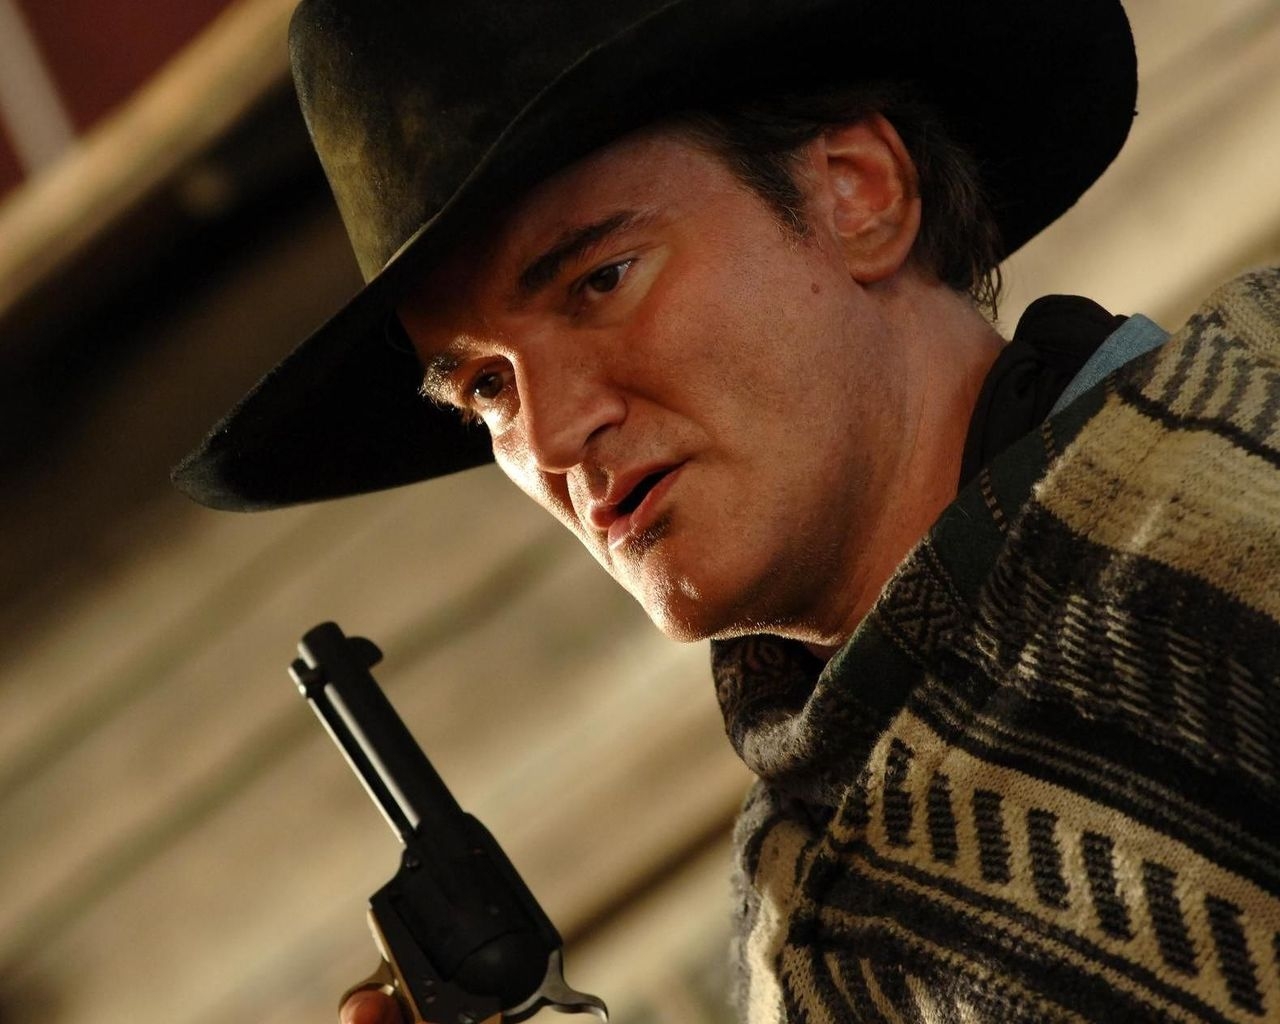 The Hateful Eight Quentin Tarantino for 1280 x 1024 resolution